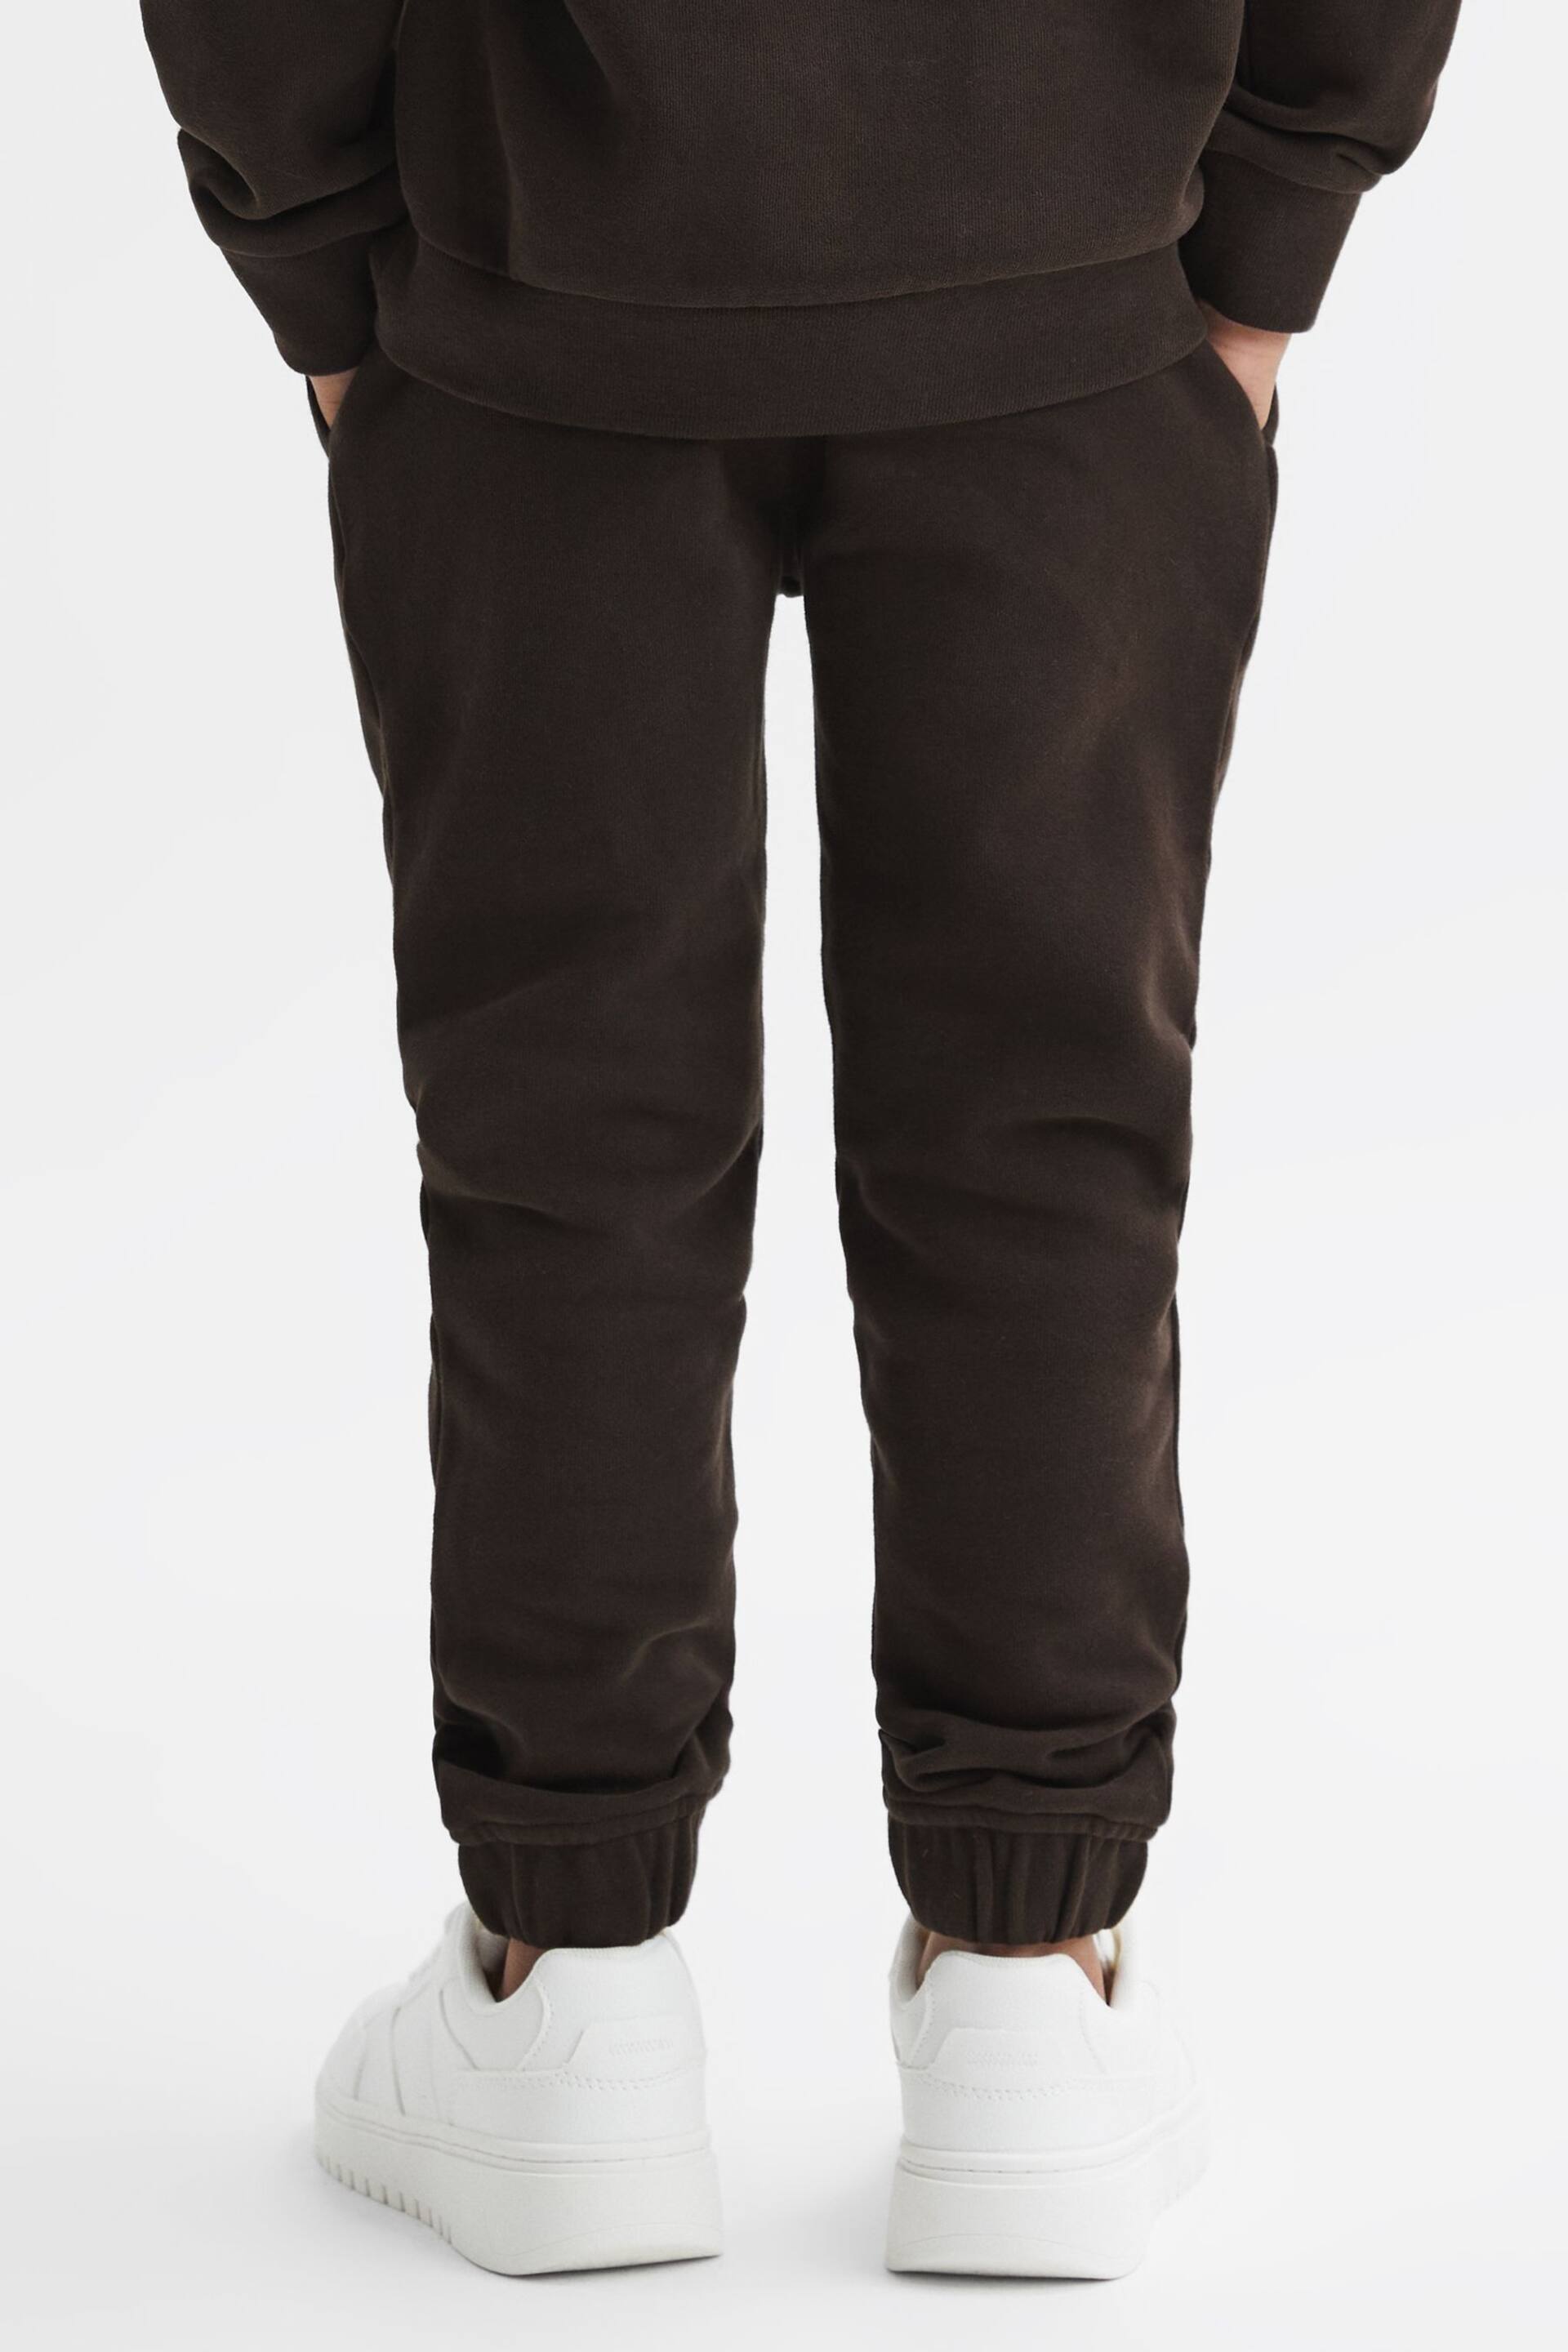 Reiss Chocolate Toby Junior Garment Dyed Logo Joggers - Image 5 of 6